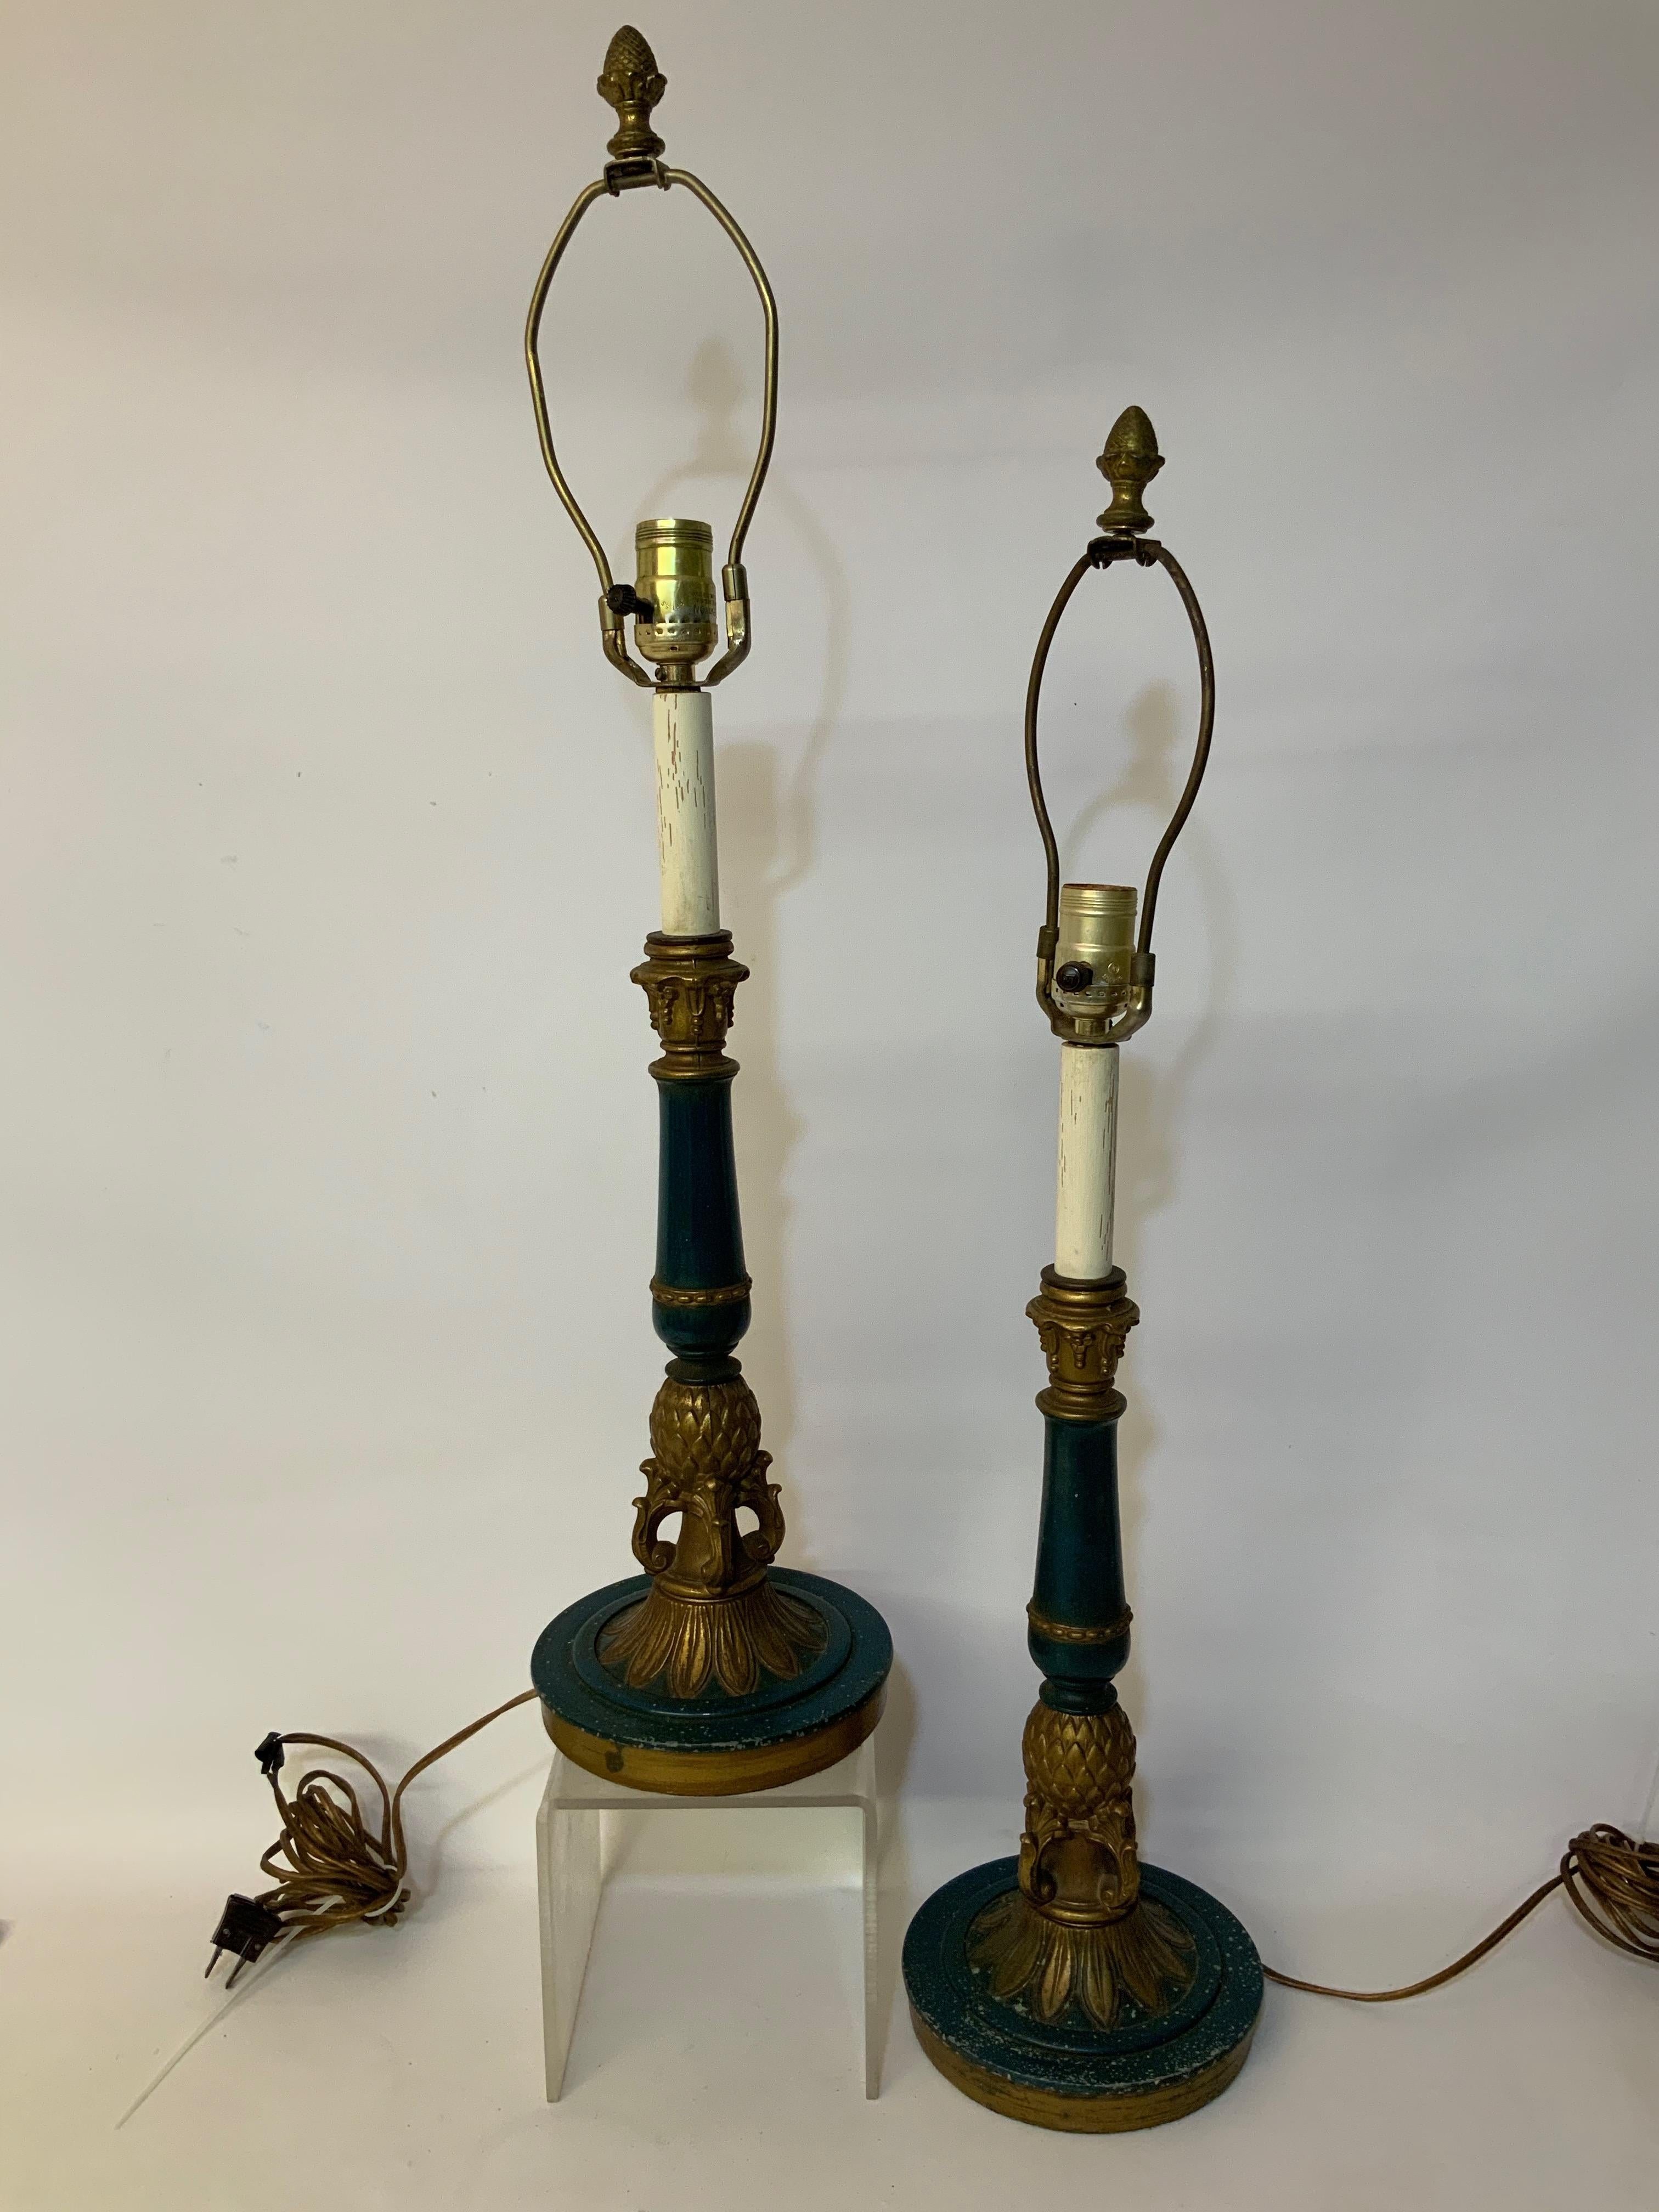 Cast metal foliate and scroll pineapple lamps with white wood toppers ending with a metal acorn finial. Dark green and parcel-gilt, circa 1960-1970. Good condition with original wiring. Harps included. No shades. Overall wear from age and